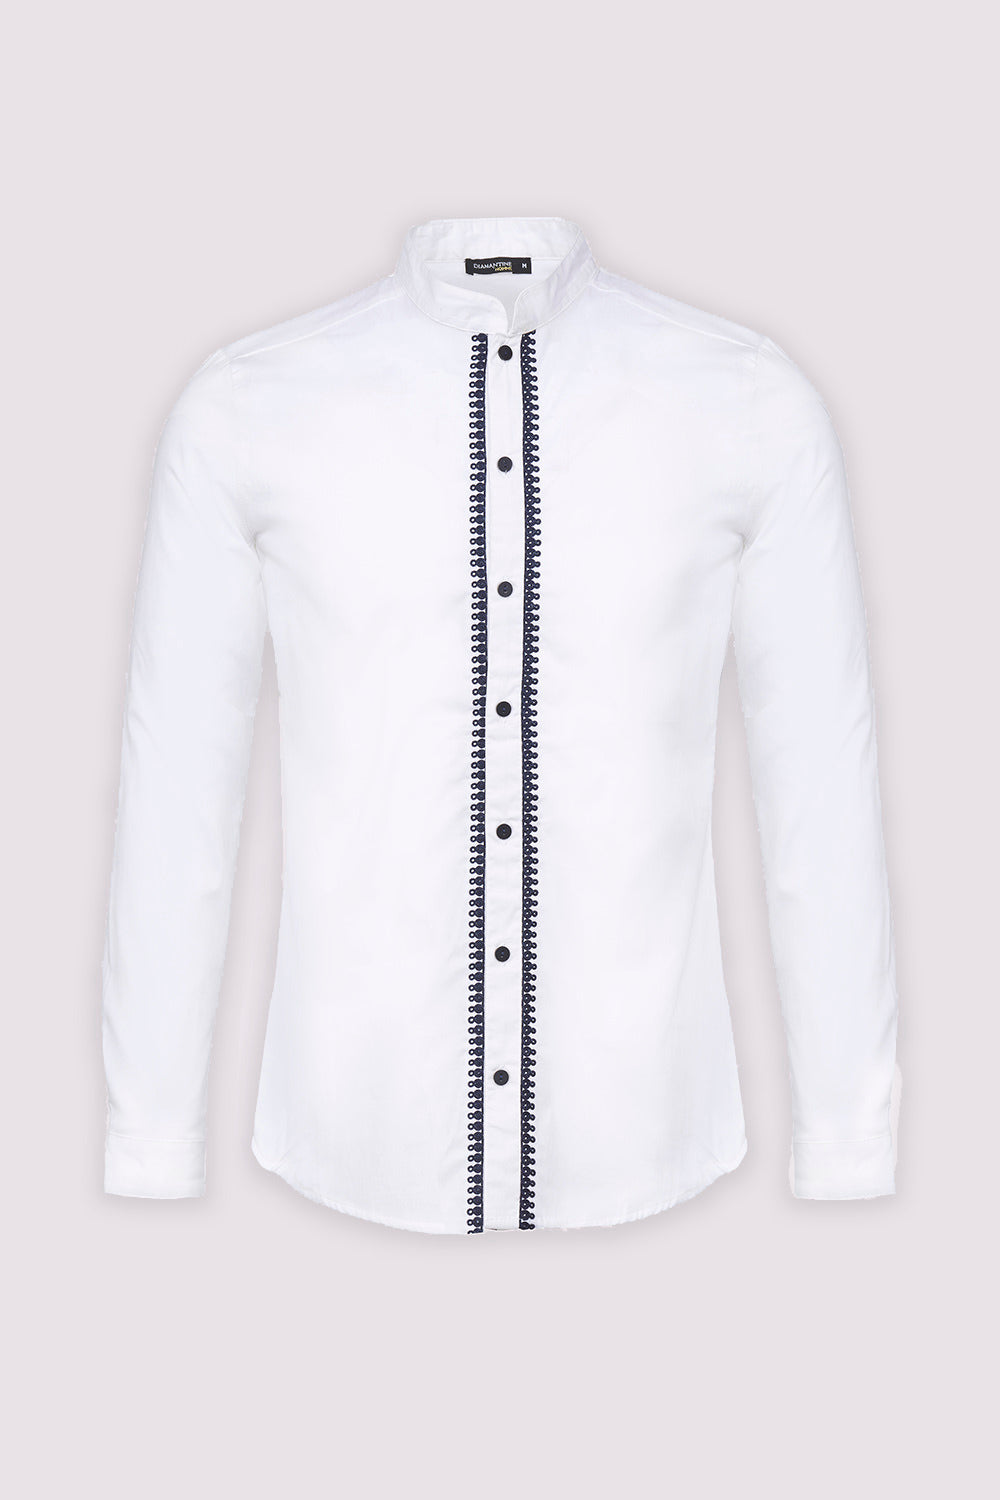 Ayman Long Sleeve Stand Up Collar Men's Button-Up Shirt in White